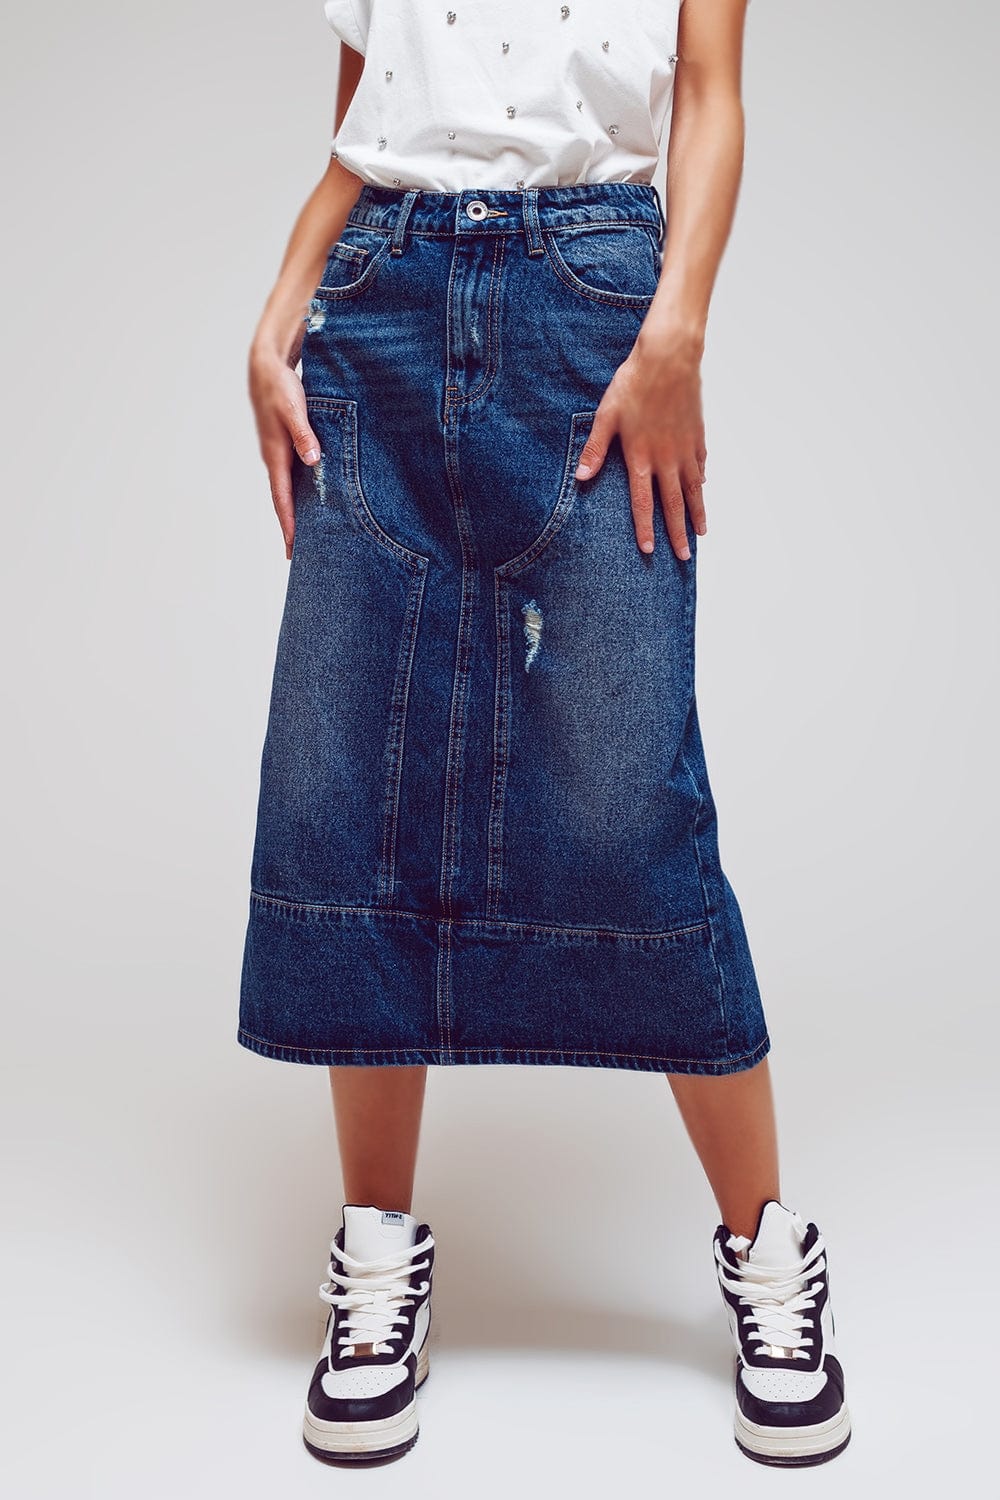 Q2 Women's Skirt Maxi Pencil Denim Skirt With Panel Details In The Front